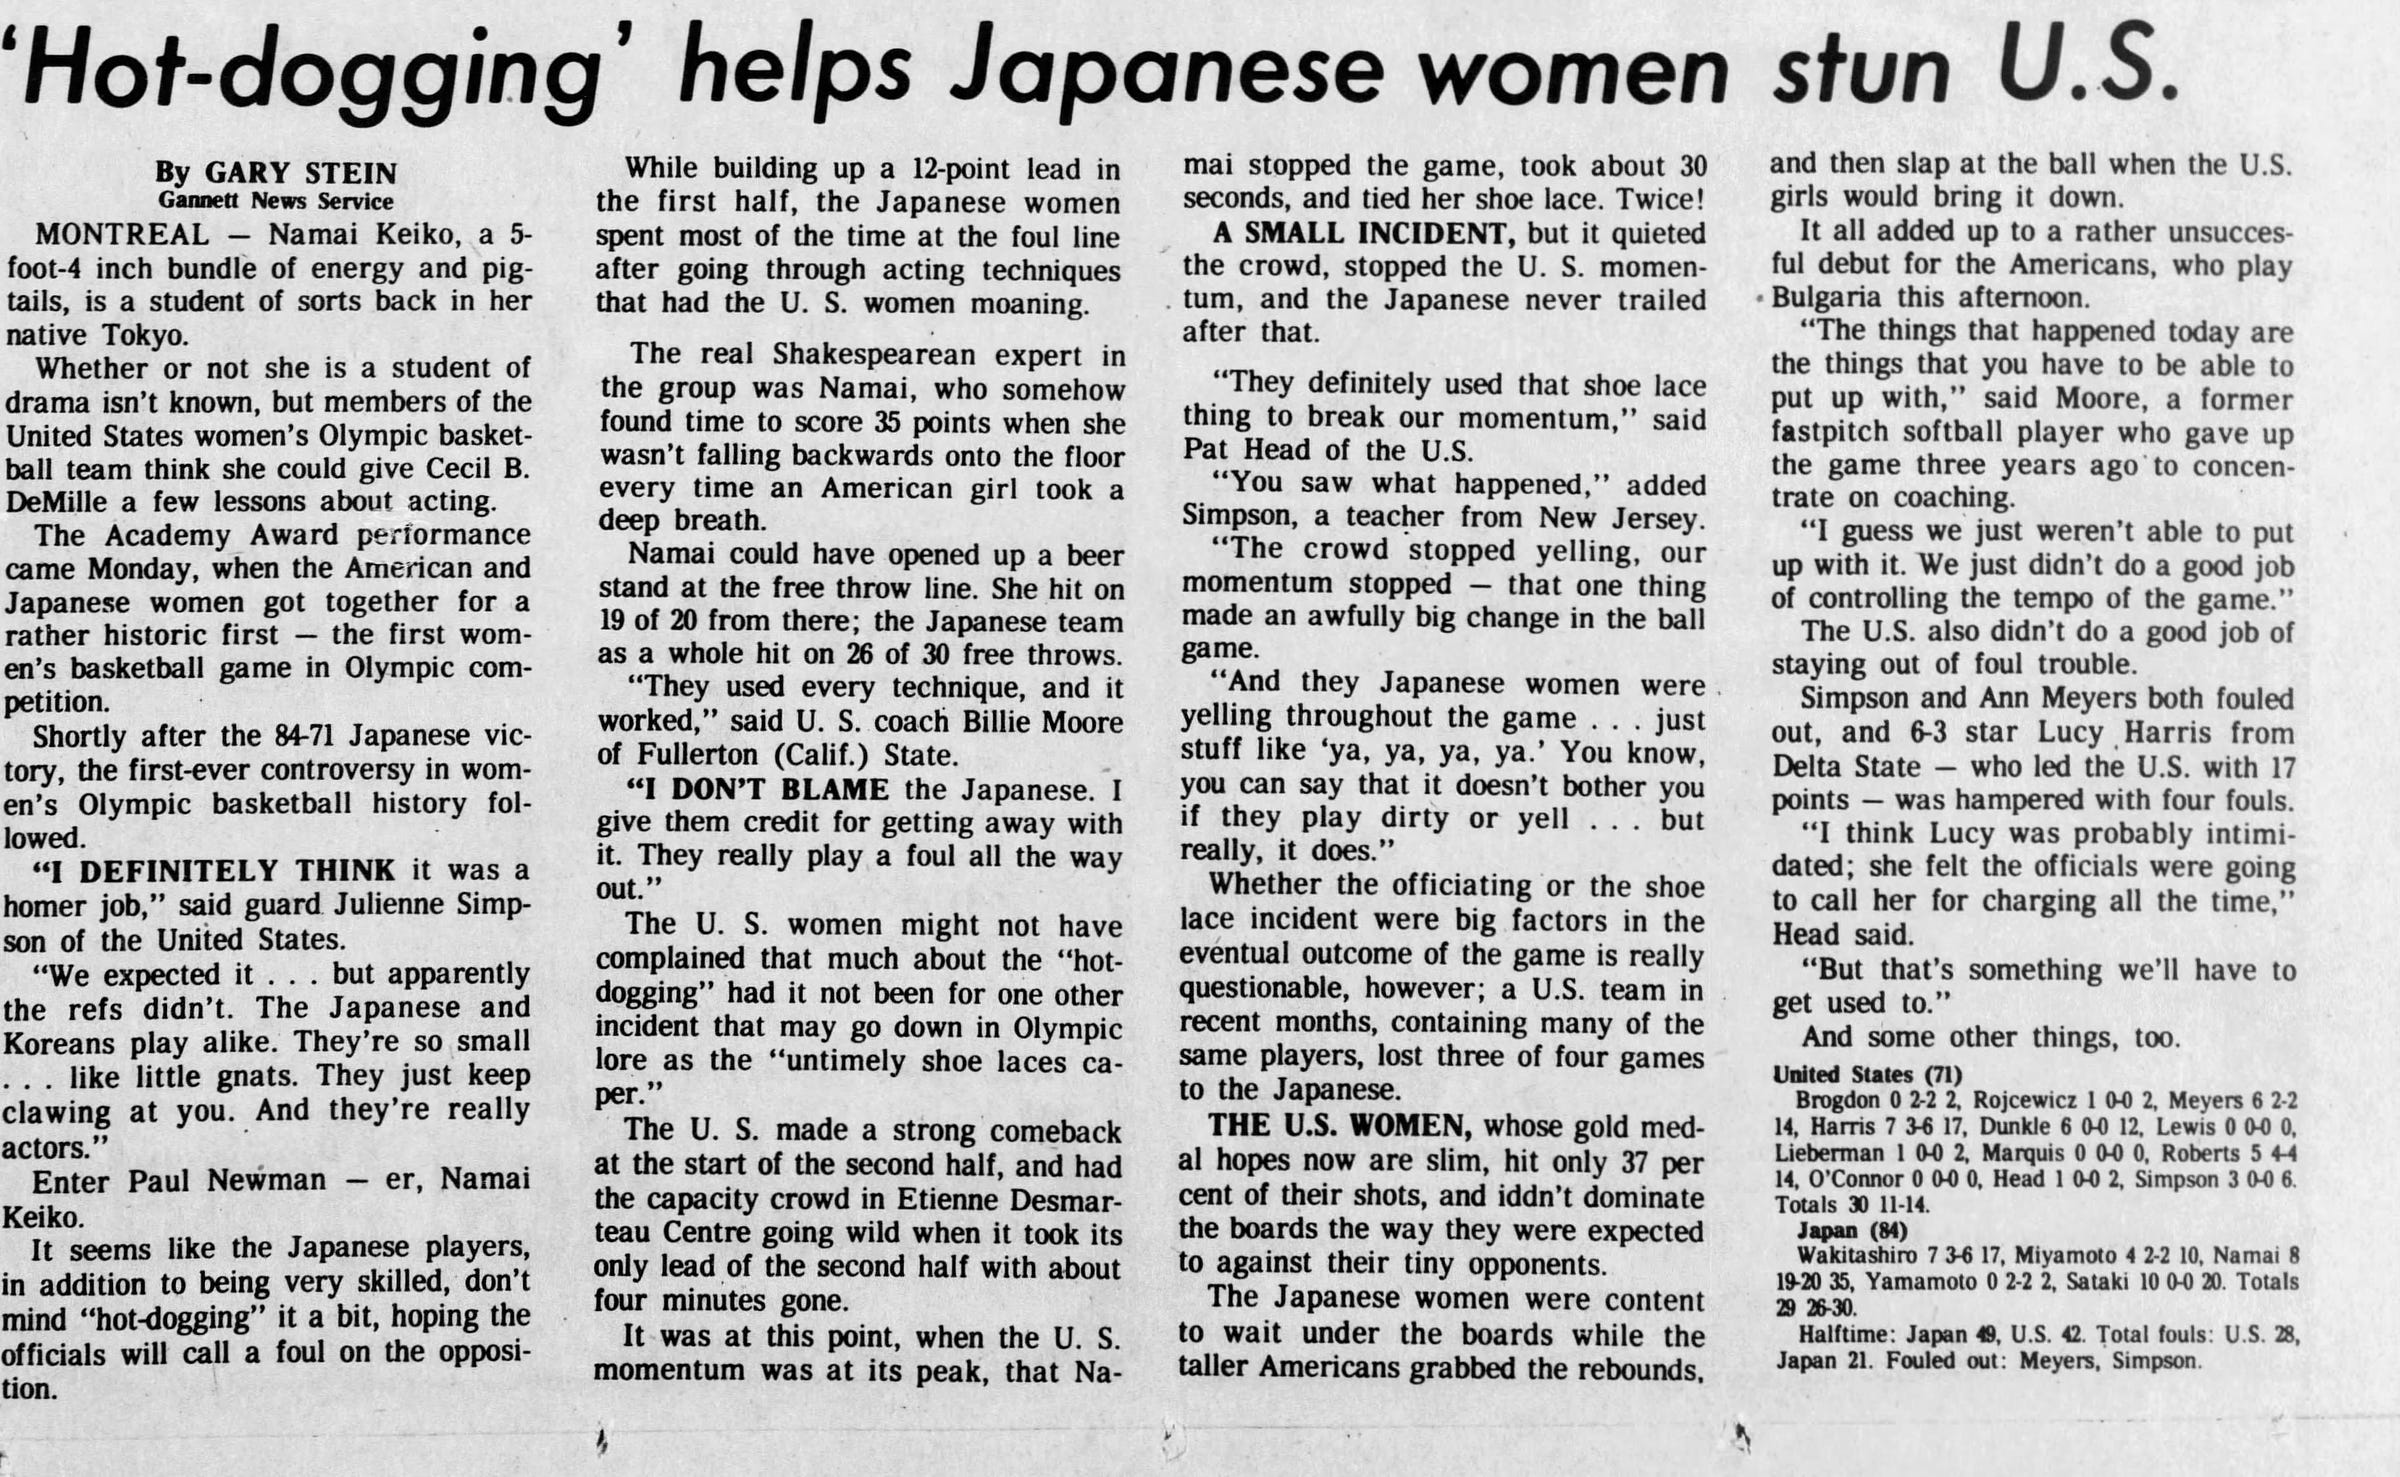 'Hot-dogging' helps Japanese women By GARY STEIN Gannett News Service MONTREAL - Namai Keiko, a 5-foot-4 inch bundle of energy and pigtails, is a student of sorts back in her native Tokyo. Whether or not she is a student of drama isn't known, but members of the United States women's Olympic basketball team think she could give Cecil B. DeMille a few lessons about acting. The Academy Award performance came Monday, when the American and Japanese women got together for a rather historic first the first women's basketball game in Olympic competition. Shortly after the 84-71 Japanese victory, the first-ever controversy in women's Olympic basketball history followed. "I DEFINITELY THINK it was a homer job," said guard Julienne Simpson of the United States. "We expected it . . . but apparently the refs didn't. The Japanese and Koreans play alike. They're so small . . . like little gnats. They just keep clawing at you. And they're really actors." Enter Paul Newman er, Namai Keiko. It seems like the Japanese players, in addition to being very skilled, don't mind "hot-dogging" it a bit, hoping the officials will call a foul on the opposition. While building up a 12-point lead in the first half, the Japanese women spent most of the time at the foul line after going through acting techniques that had the U. S. women moaning. The real Shakespearean expert in the group was Namai, who somehow found time to score 35 points when she wasn't falling backwards onto the floor every time an American girl took a deep breath. Namai could have opened up a beer stand at the free throw line. She hit on 19 of 20 from there; the Japanese team as a whole hit on 26 of 30 free throws. "They used every technique, and it worked," said U. S. coach Billie Moore of Fullerton (Calif.) State. "I DON'T BLAME the Japanese. I give them credit for getting away with it. They really play a foul all the way out." The U. S. women might not have complained that much about the "hot-dogging" had it not been for one other incident that may go down in Olympic lore as the "untimely shoe laces caper." The U. S. made a strong comeback at the start of the second half, and had the capacity crowd in Etienne Desmar-teau Centre going wild when it took its only lead of the second half with about four minutes gone. It was at this point, when the U. S. momentum was at its peak, that Na mai stopped the game, took about 30 seconds, and tied her shoe lace. Twice! A SMALL INCIDENT, but it quieted the crowd, stopped the U. S. momen-. turn, and the Japanese never trailed after that. "They definitely used that shoe lace thing to break our momentum," said Pat Head of the U.S. "You saw what happened," added Simpson, a teacher from New Jersey. "The crowd stopped yelling, our momentum stopped that one thing made an awfully big change in the ball game. "And they Japanese women were yelling throughout the game . . . just stuff like 'ya. ya, ya, ya.' You know, you can say that it doesn't bother you if they play dirty or yell ... but really, it does." Whether the officiating or the shoe lace incident were big factors in the eventual outcome of the game is really questionable, however; a U.S. team in recent months, containing many of the same players, lost three of four games to the Japanese. THE U.S. WOMEN, whose gold medal hopes now are slim, hit only 37 per cent of their shots, and iddn't dominate the boards the way they were expected to against their tiny opponents. The Japanese women were content to wait under the boards while the taller Americans grabbed the rebounds. stun U.S. and then slap at the ball when the U.S. girls would bring it down. It all added up to a rather unsucces-ful debut for the Americans, who play Bulgaria this afternoon. "The things that happened today are the things that you have to be able to put up with," said Moore, a former fastpitch softball player who gave up the game three years ago to concentrate on coaching. "I guess we just weren't able to put up with it. We just didn't do a good job of controlling the tempo of the game." The U.S. also didn't do a good job of staying out of foul trouble. Simpson and Ann Meyers both fouled out, and 6-3 star Lucy Harris from Delta State - who led the U.S. with 17 points was hampered with four fouls. "I think Lucy was probably intimidated; she felt the officials were going to call her for charging all the time," Head said. "But that's something we'll have to get used to." And some other things, too.